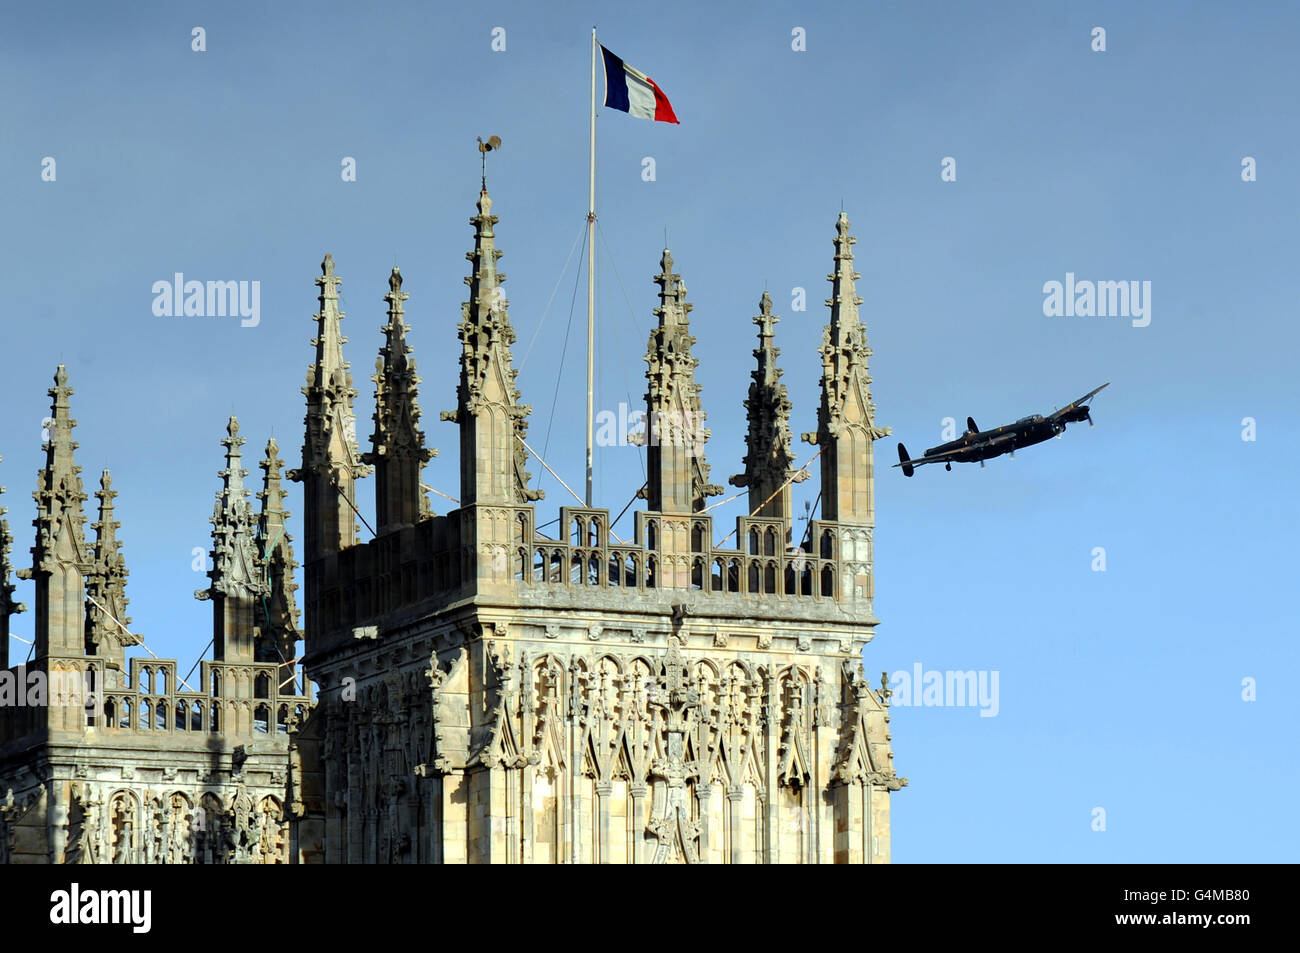 A French/Anglo flag is flown from York Minster as a Lancaster bomber from the Battle of Memorial Flight flies by during an Anglo/French flypast following a memorial service at York Minster, for the inauguration of a memorial stone commemorating the French airmen based in York, who fought with RAF Bomber Command in WWII. Stock Photo